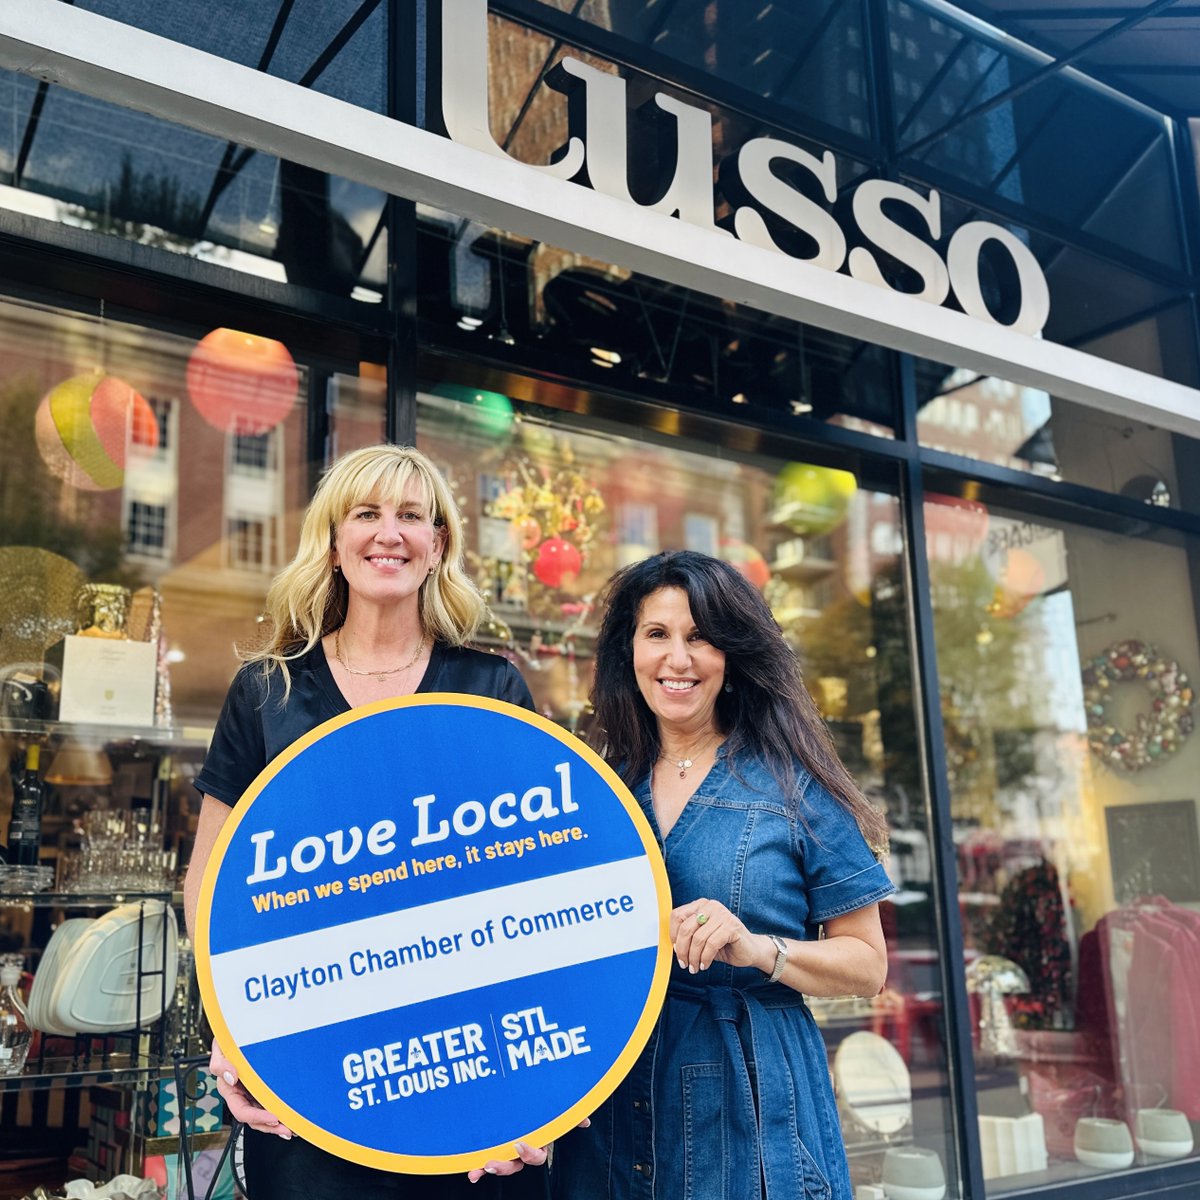 🎁SHOP SMALL STL — “We want to make sure people across the 15-county bi-state St. Louis metro know that when we spend here, it stays here,' said Greater St. Louis, Inc. CEO @JasonHallSTL. 🔗lussotheboutique.com #STLMade